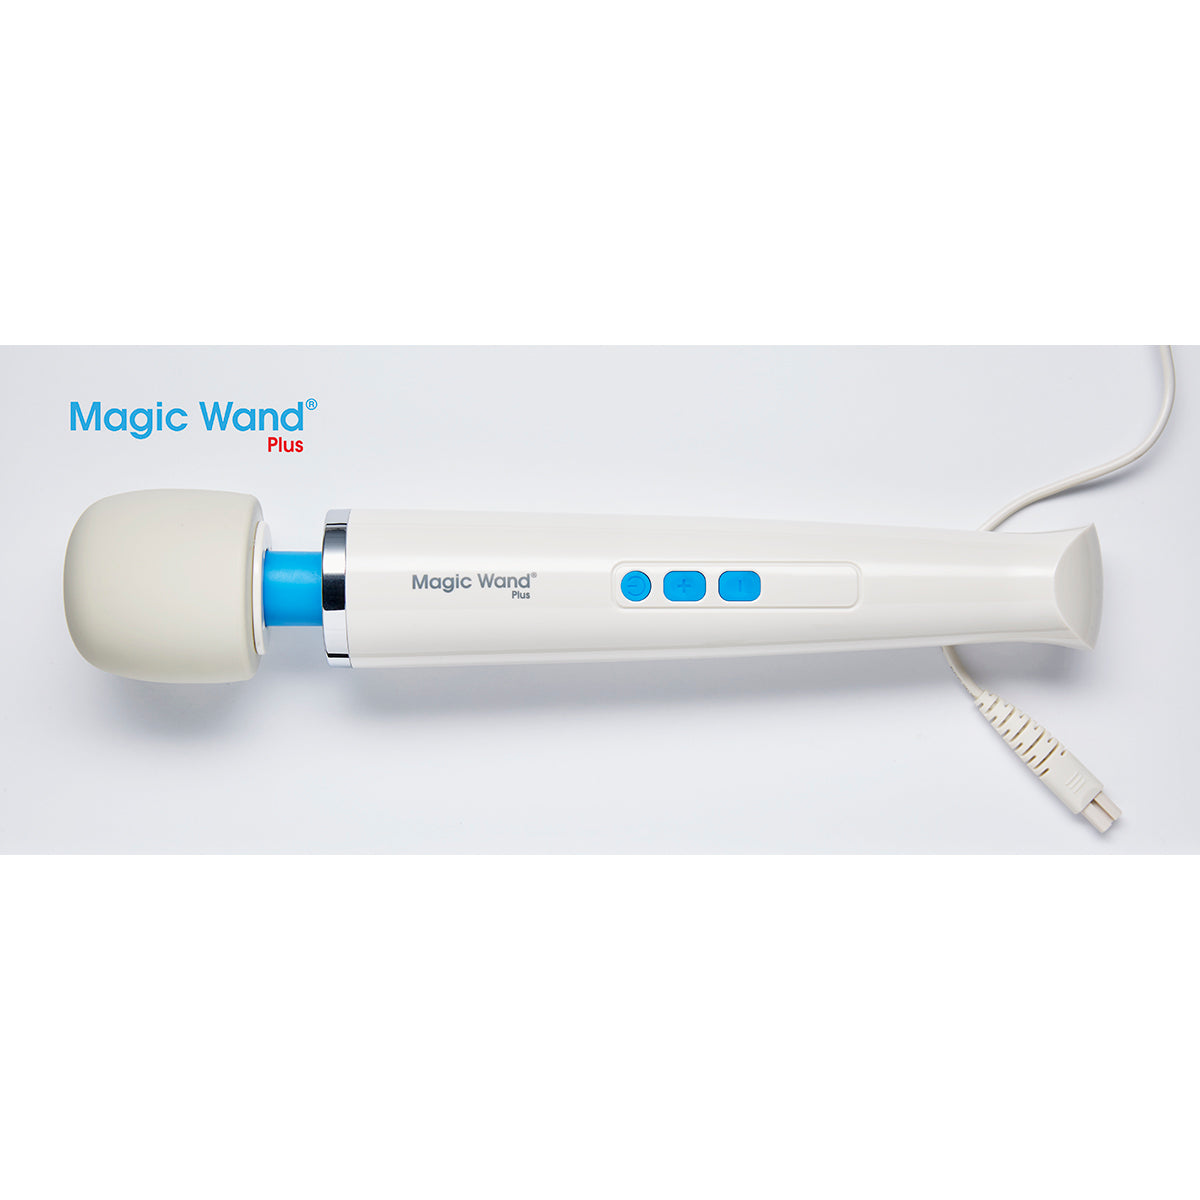 Magic wand with cord unplugged